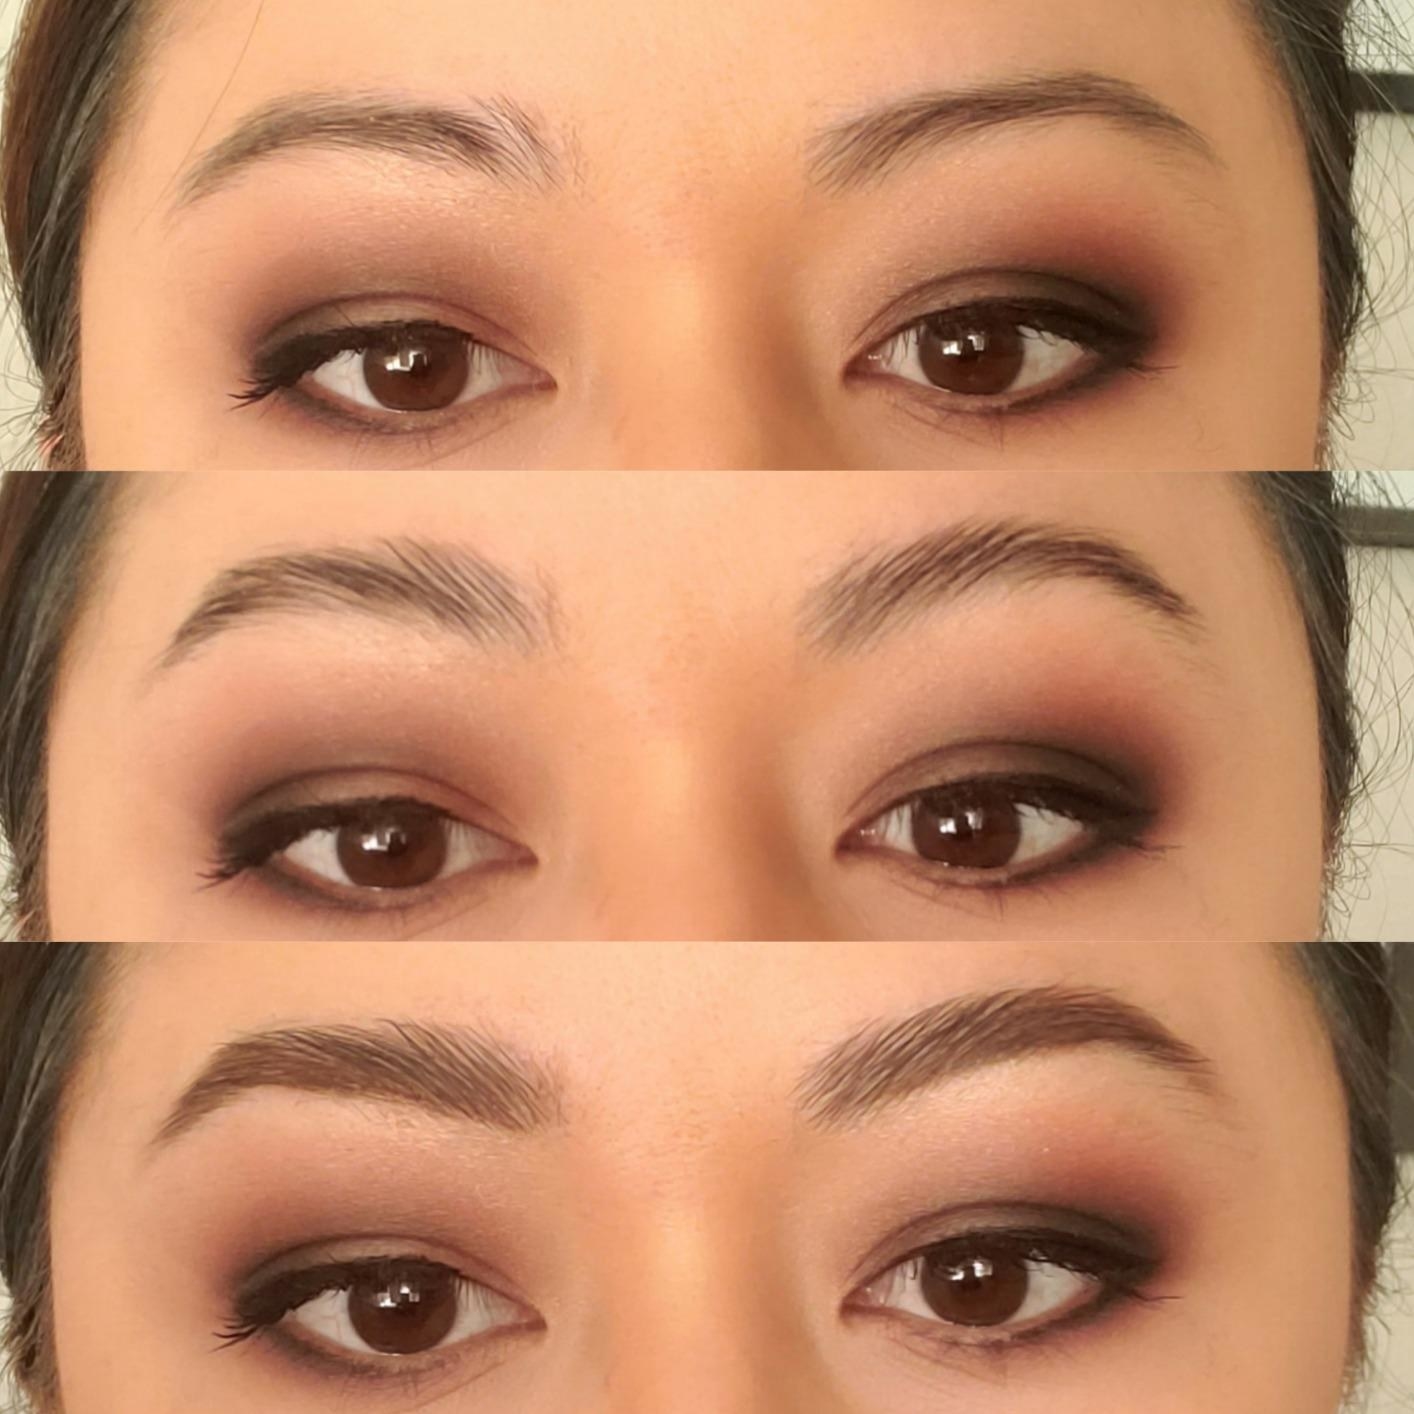 A reviewer showing a before/after of their brows after brushing up with the spoolie and soap